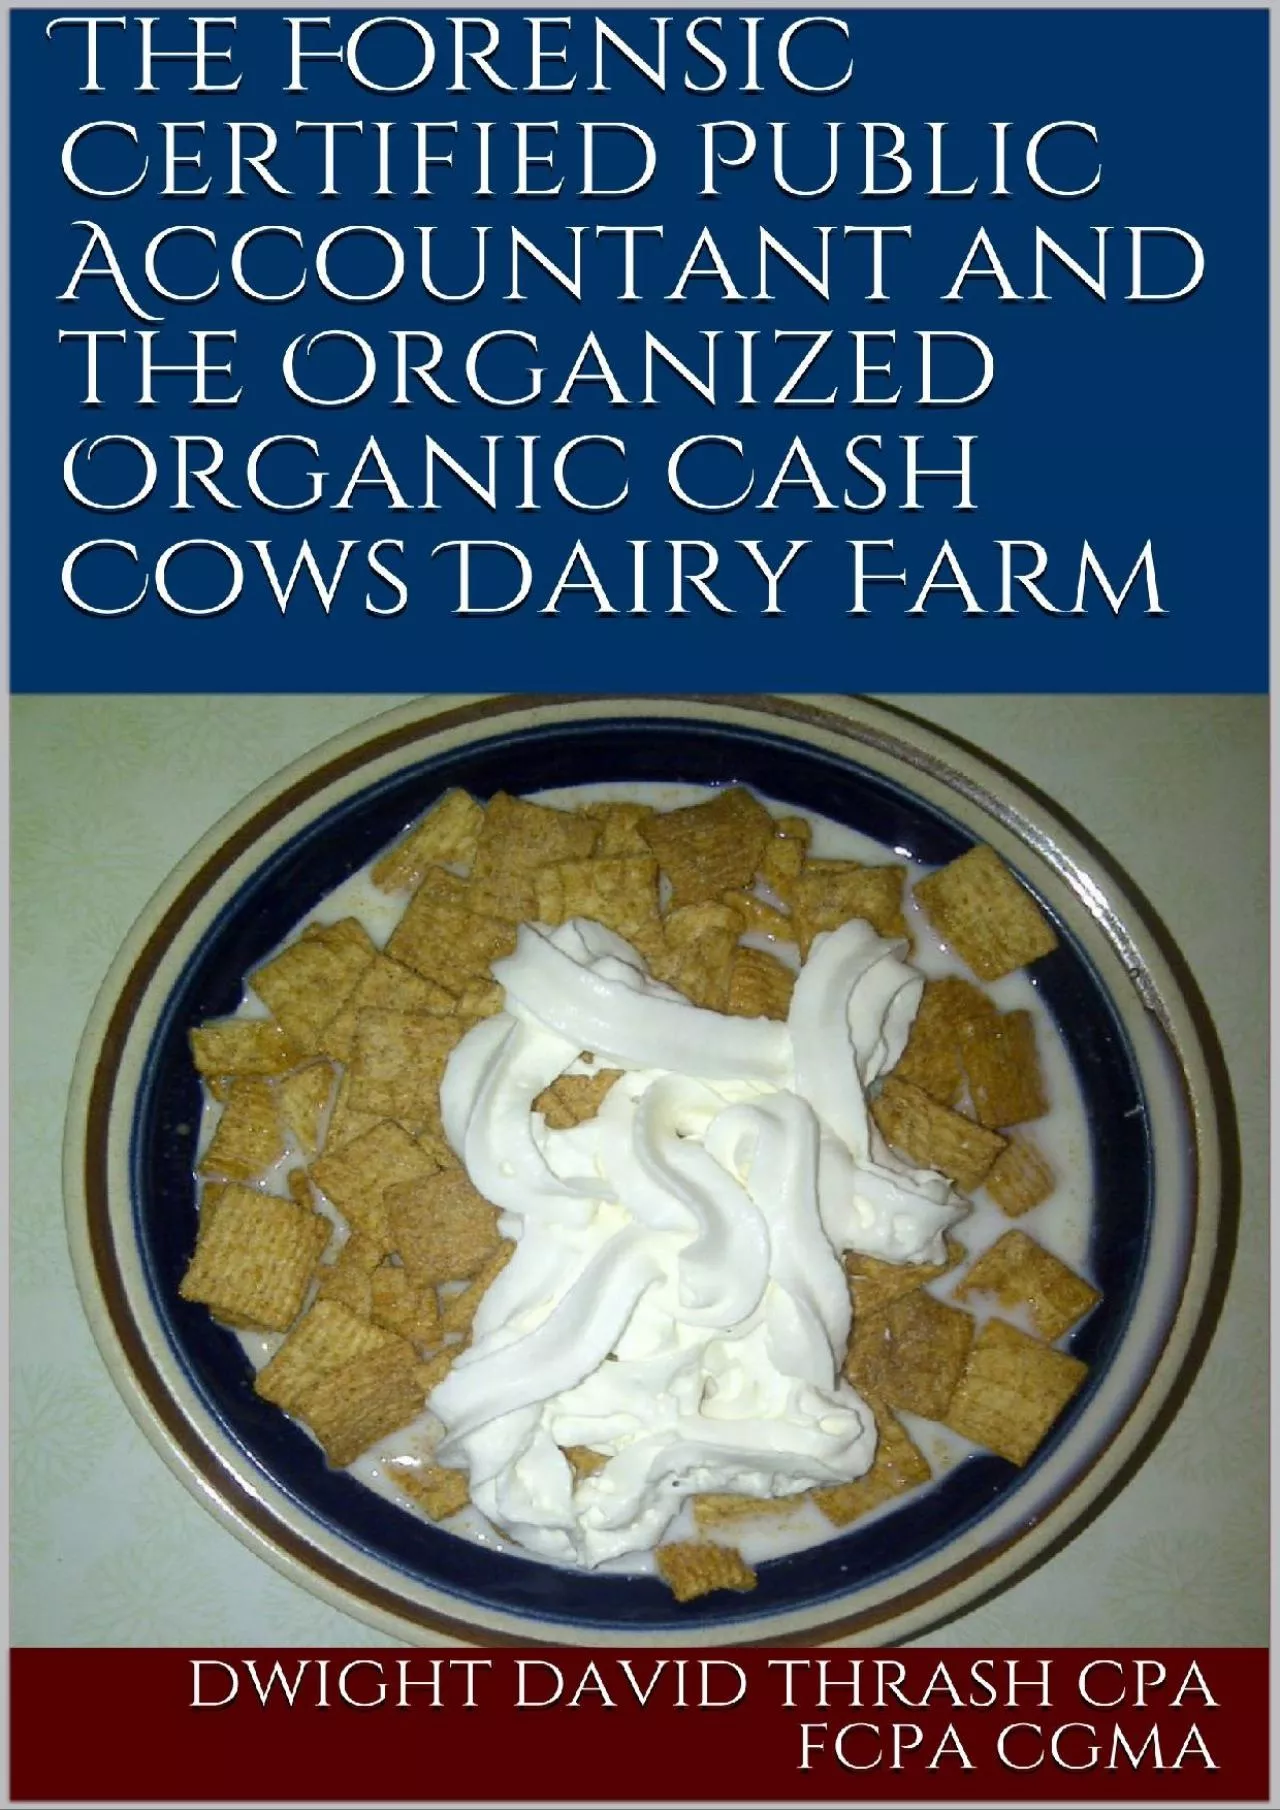 (BOOK)-The Forensic Certified Public Accountant and the Organized Organic Cash Cows Dairy